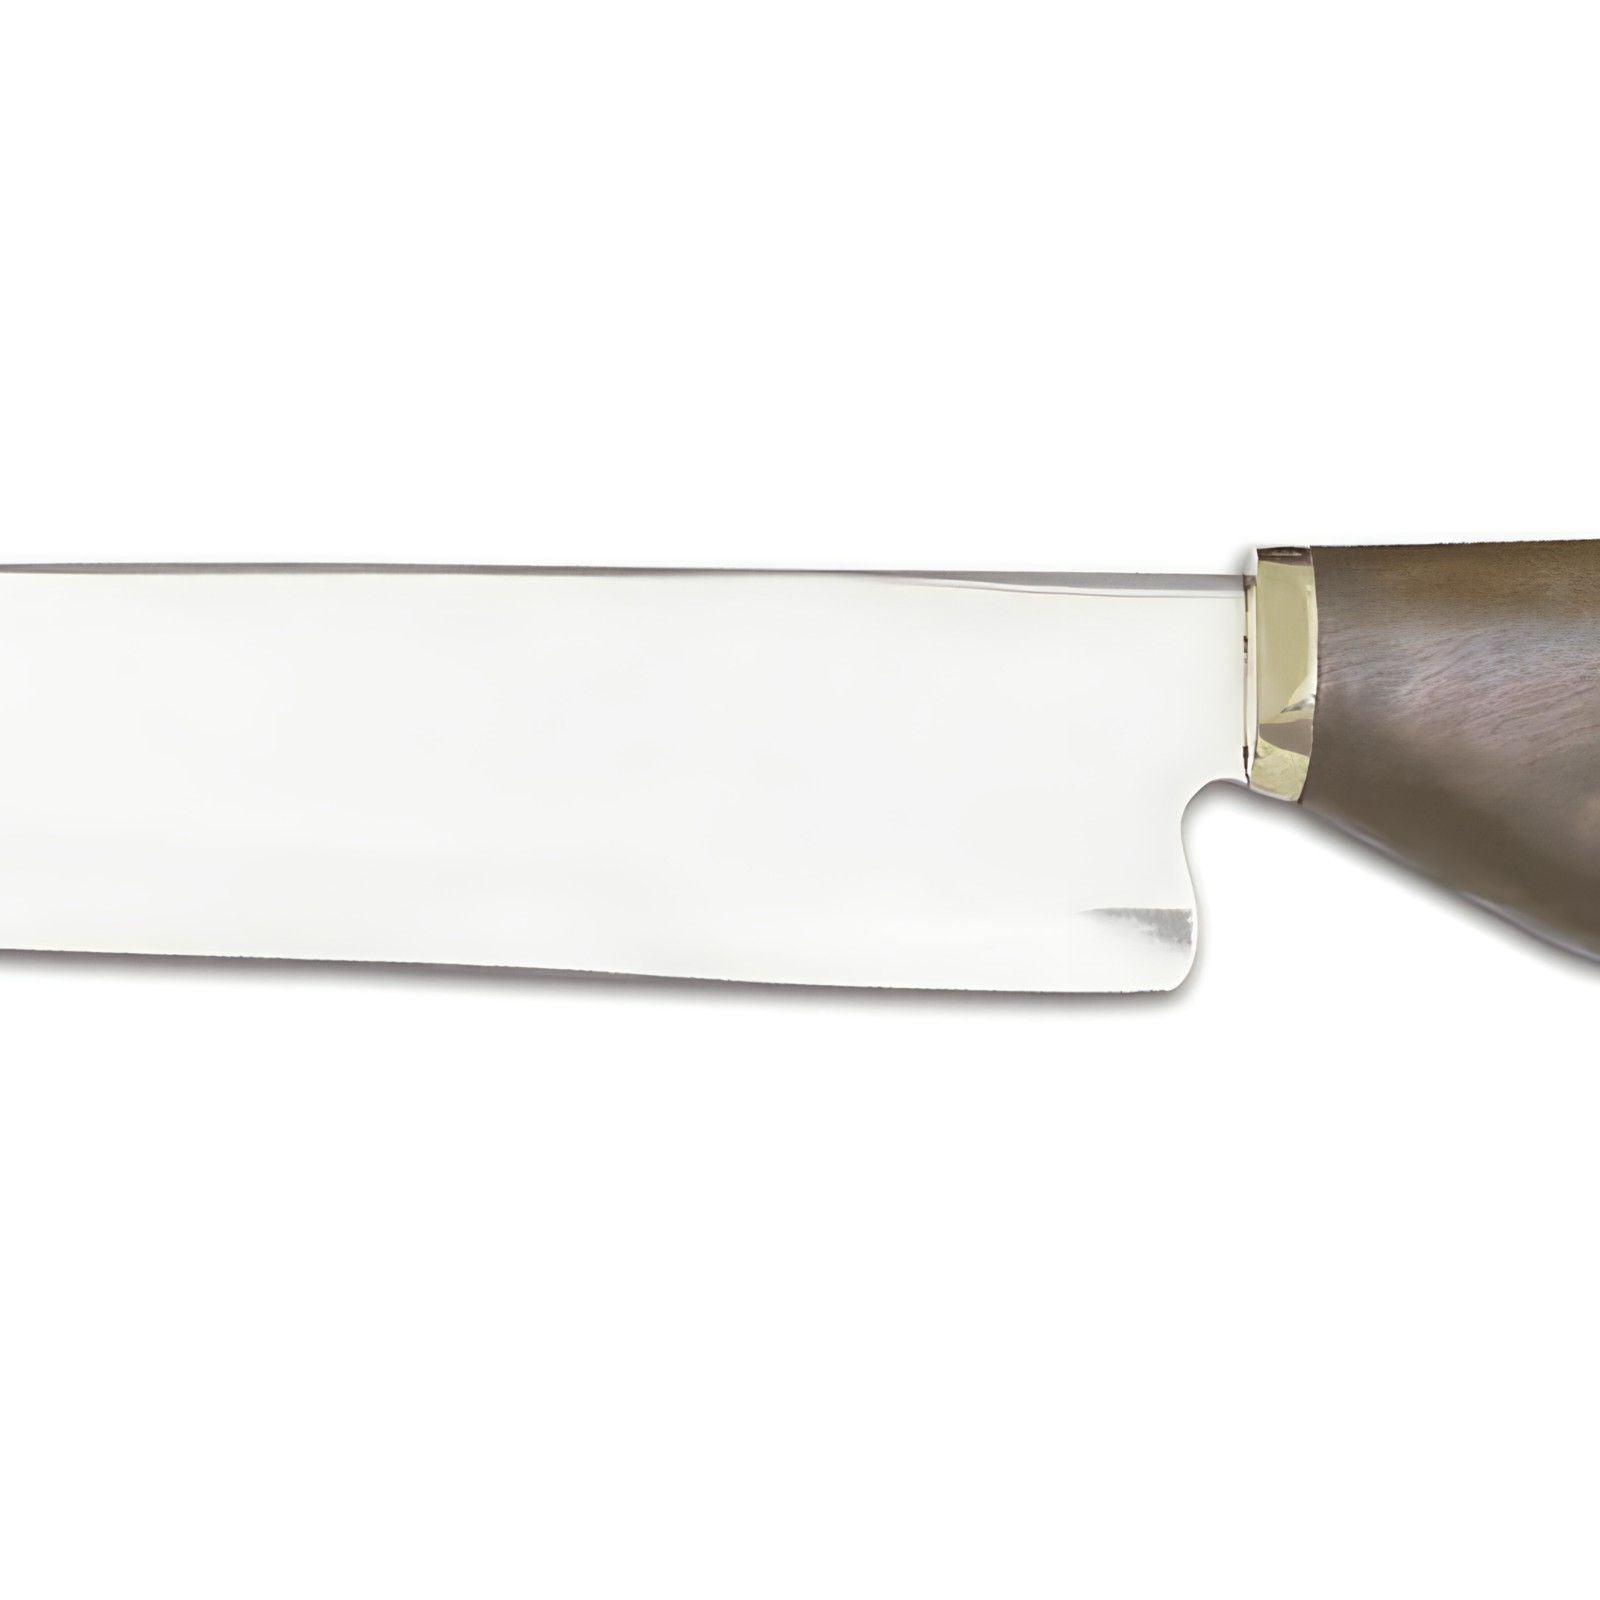 Knife Sharpeners and Butchers Steels - Butchery, Chefs and Kitchen